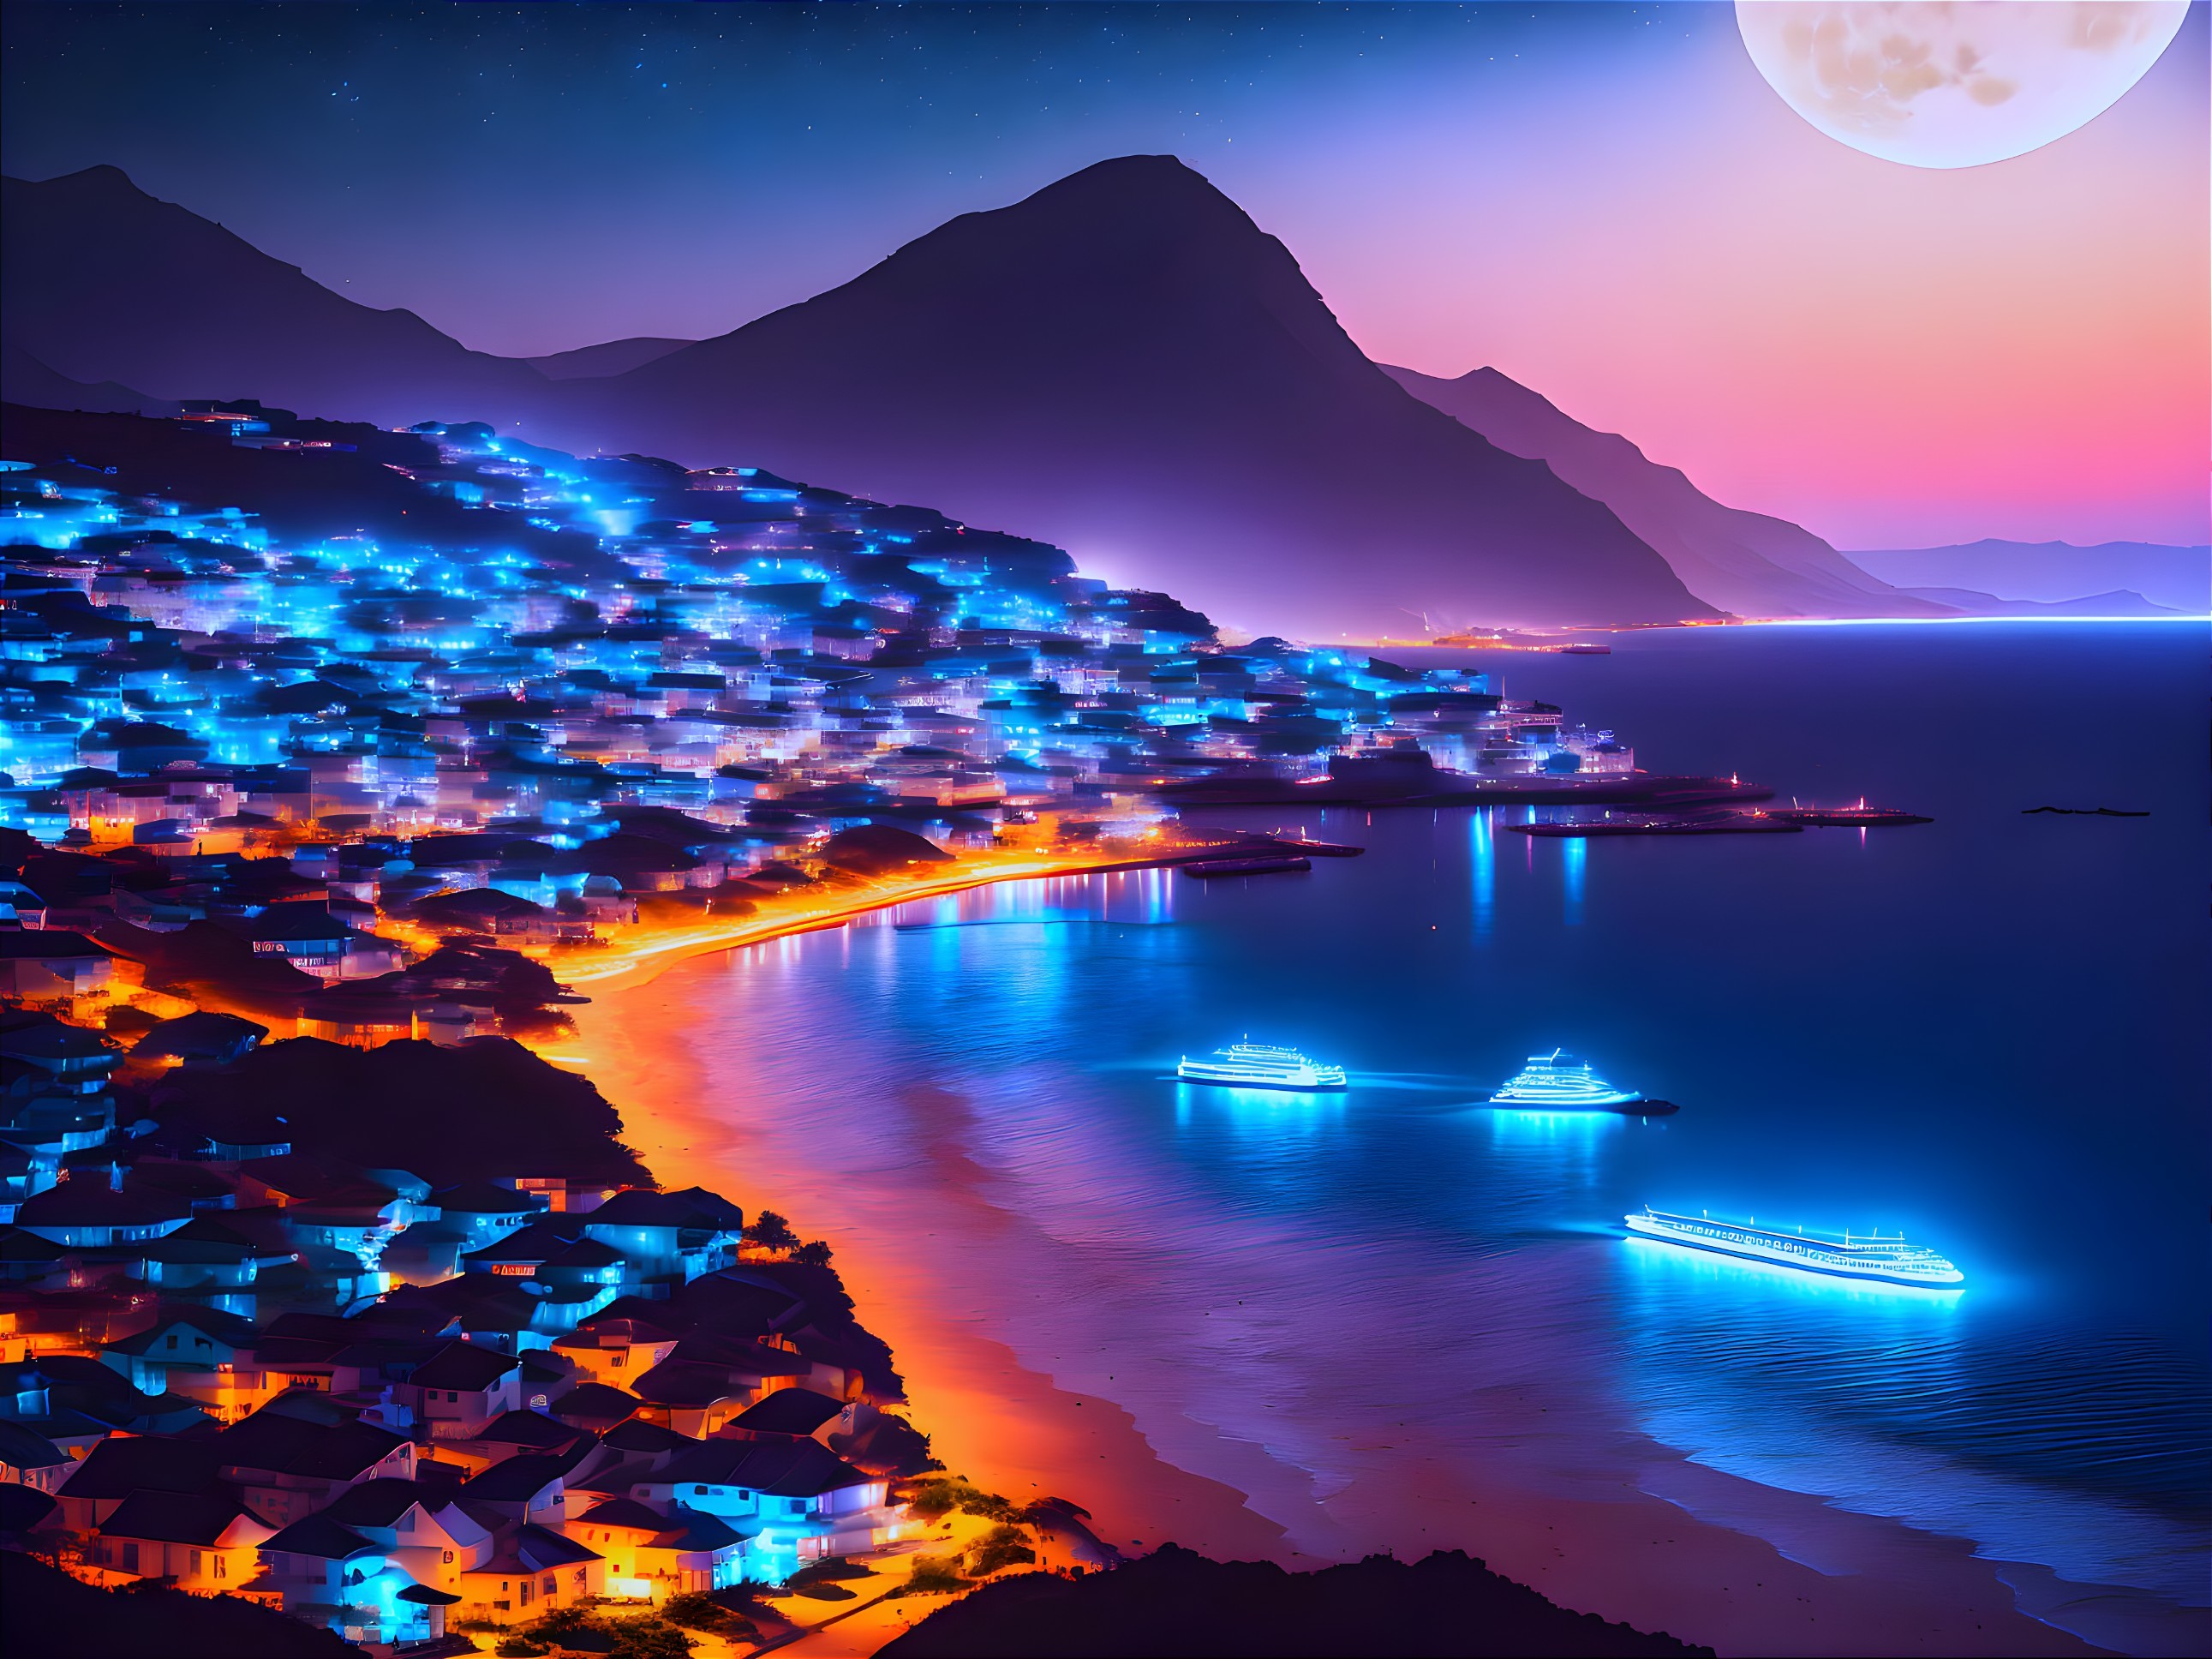 Neon-lit cruise ships in the bay of a seaside city